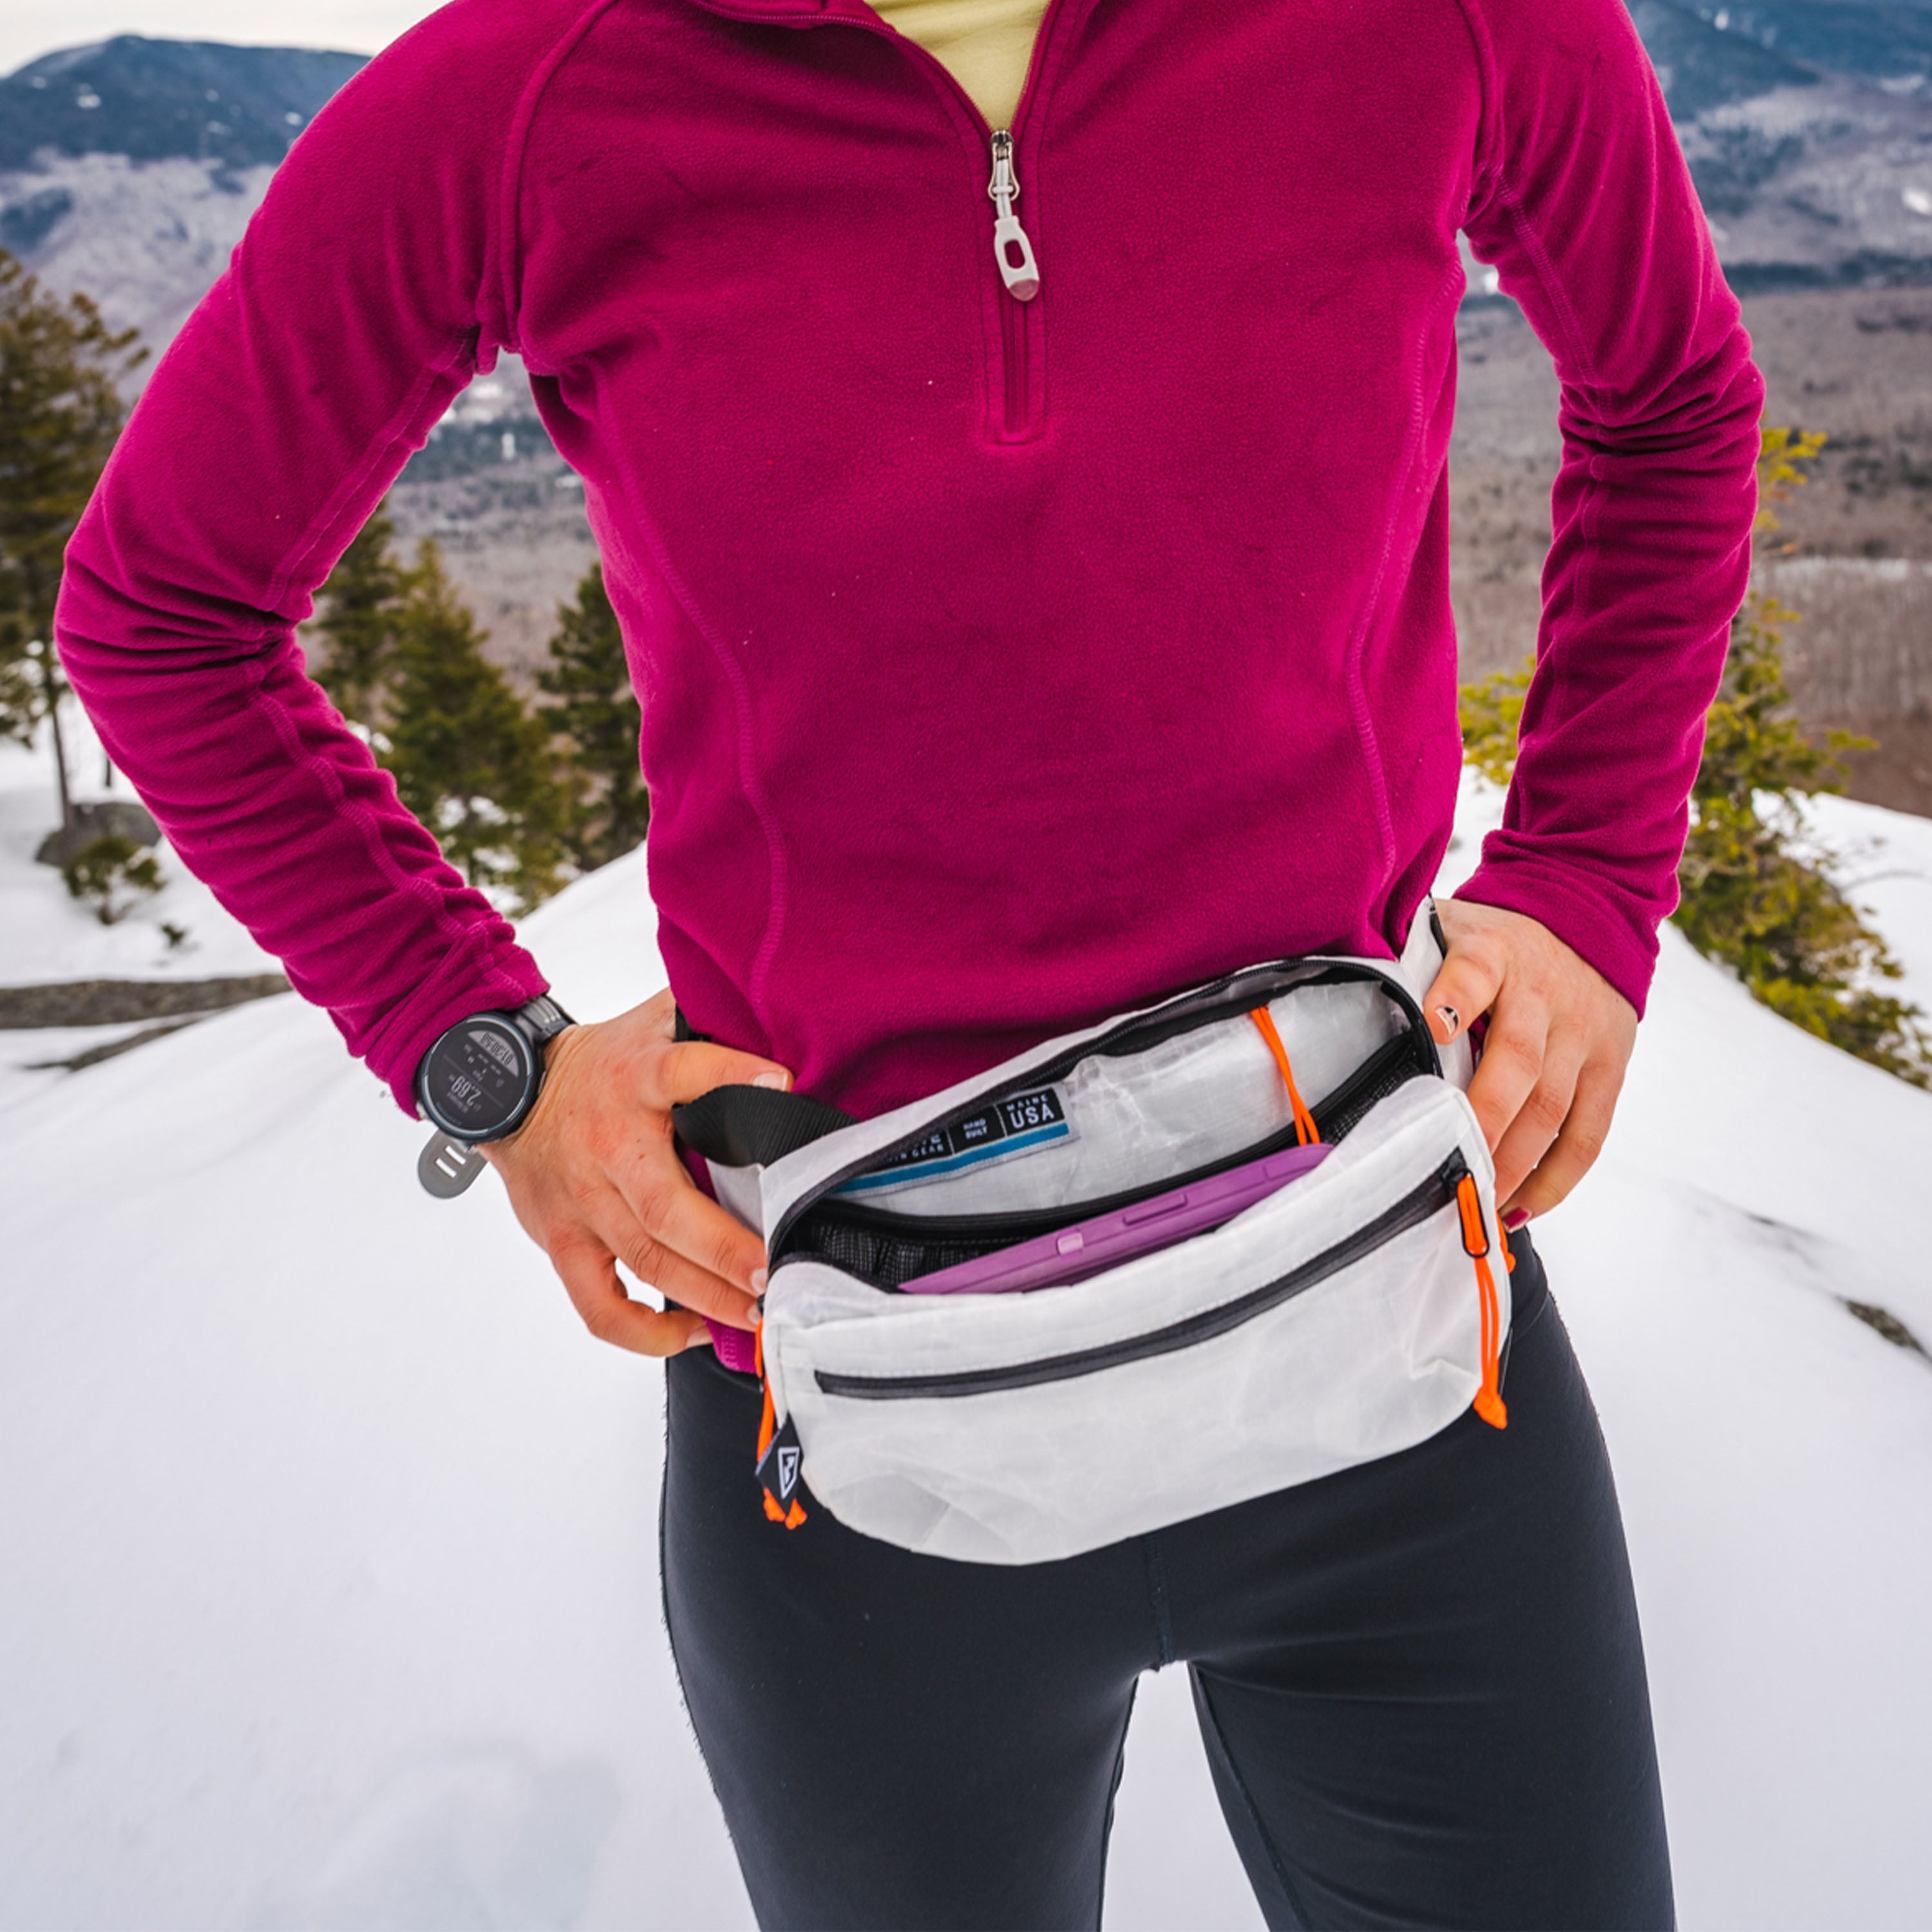 How To Wear A Fanny Pack - Top 5 Fanny Packs - V-Style